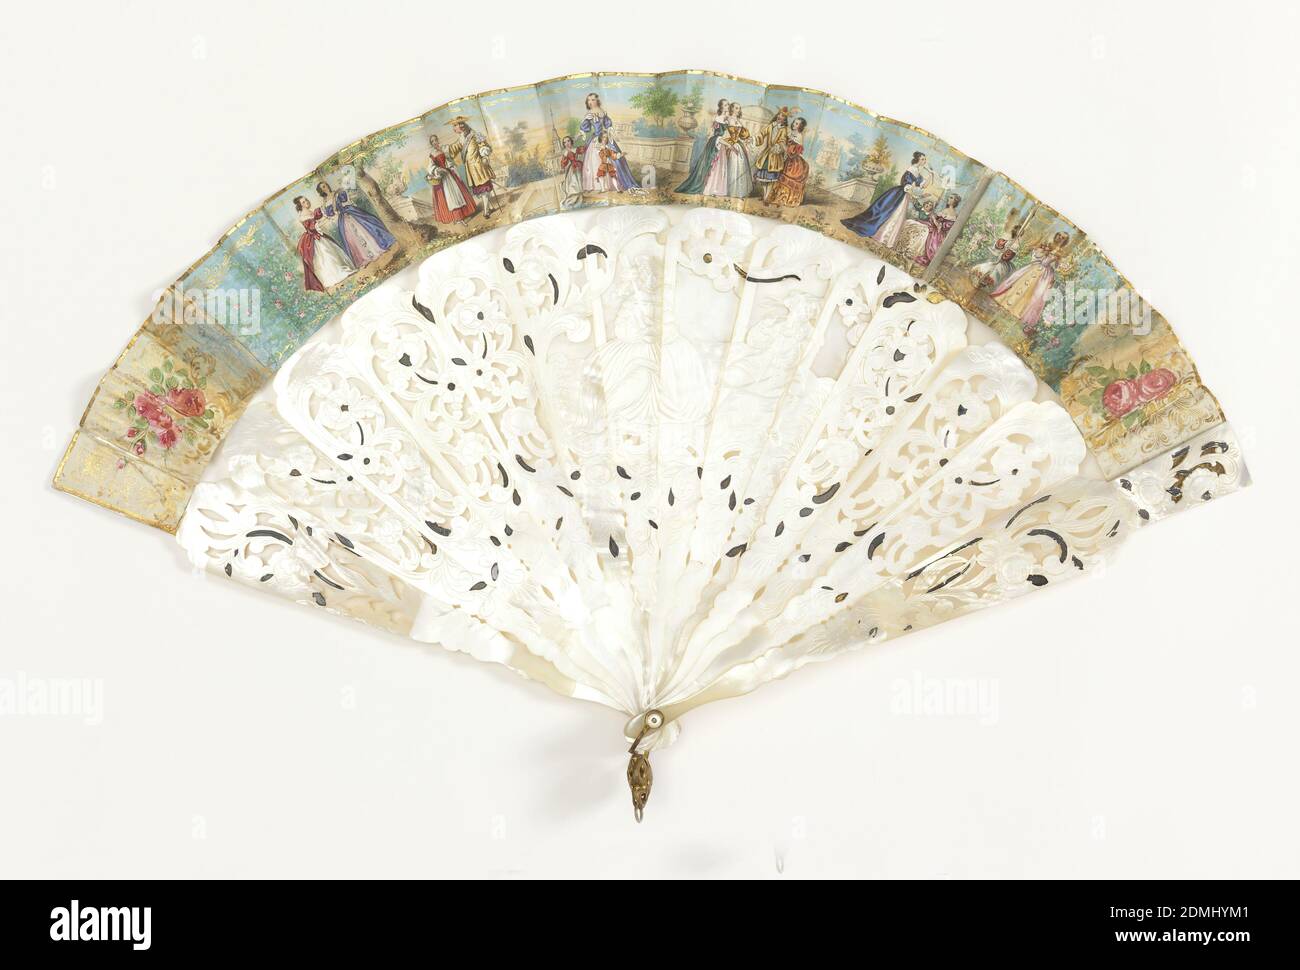 Pleated fan, Parchment leaf with gilded and hand-colored lithograph; carved and pierced mother-of-pearl sticks, Fan with carved and pierced mother-of-pearl sticks, and gilded leaf with lithograph promenade scene. On sticks: central cartouche of a lady and a gentleman playing the fife., ca. 1840, costume & accessories, Pleated fan Stock Photo